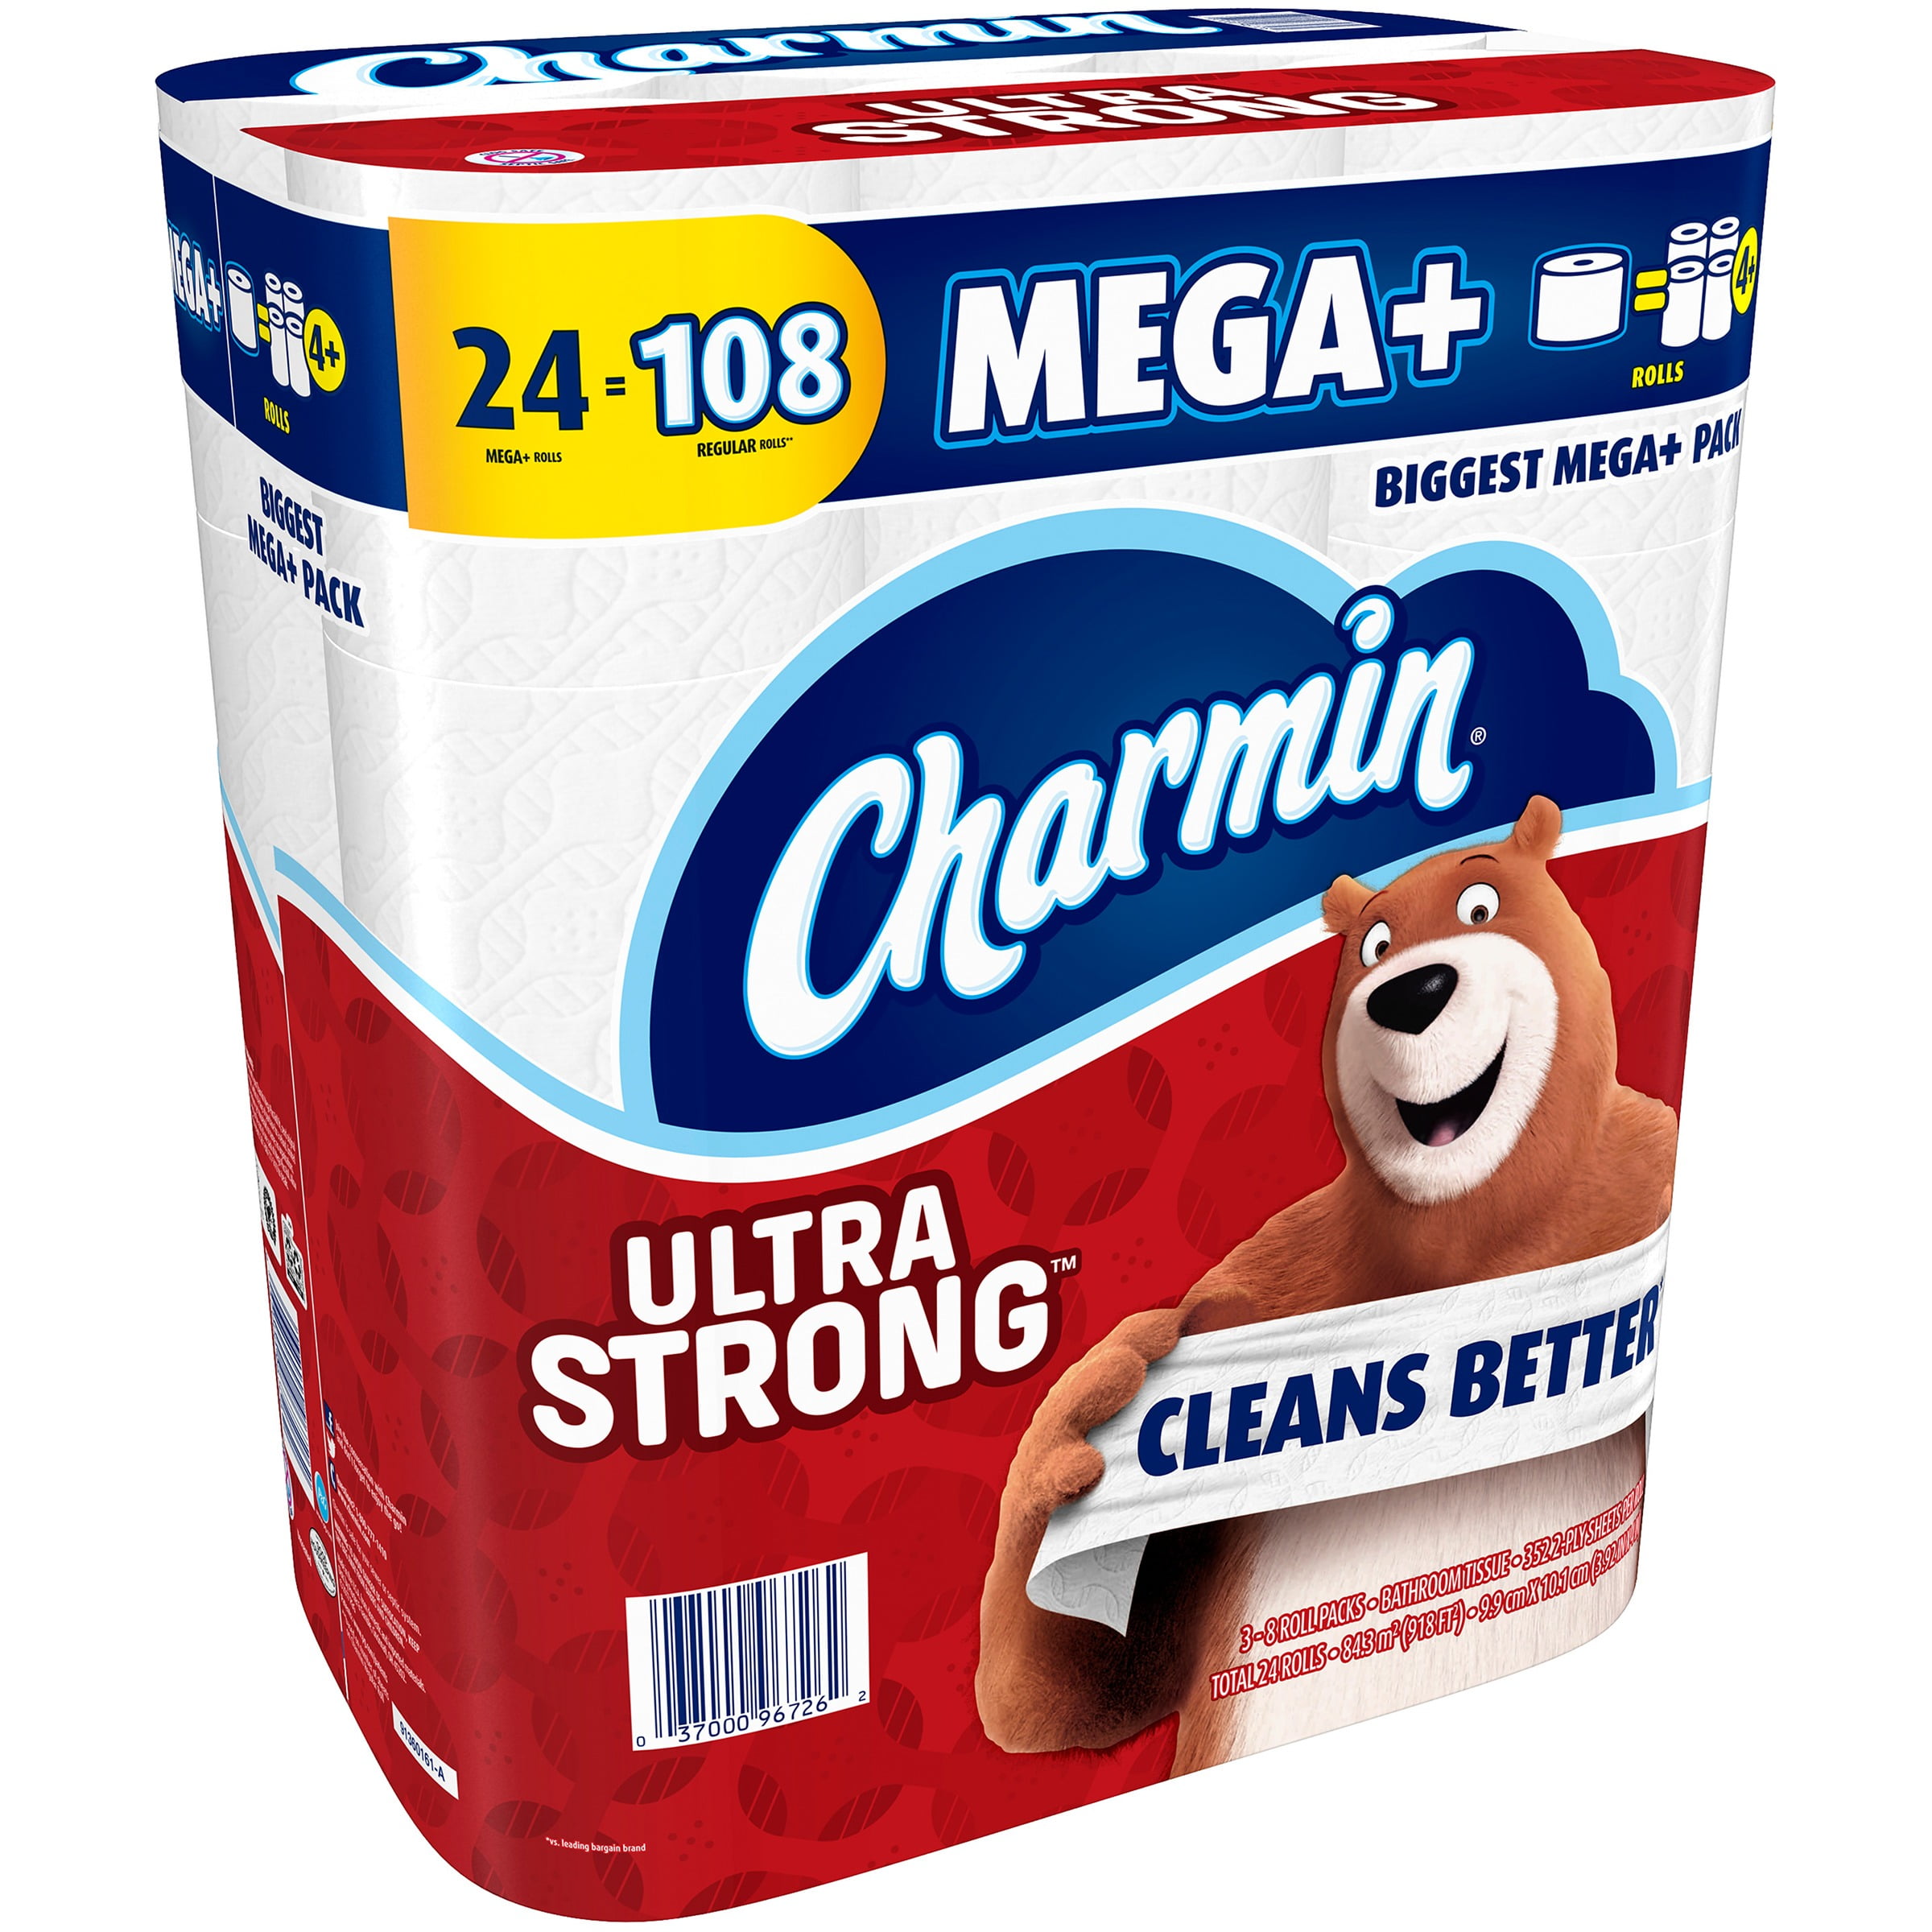 Charmin Ultra Strong Toilet Paper 24 ct Pack - Walmart.com